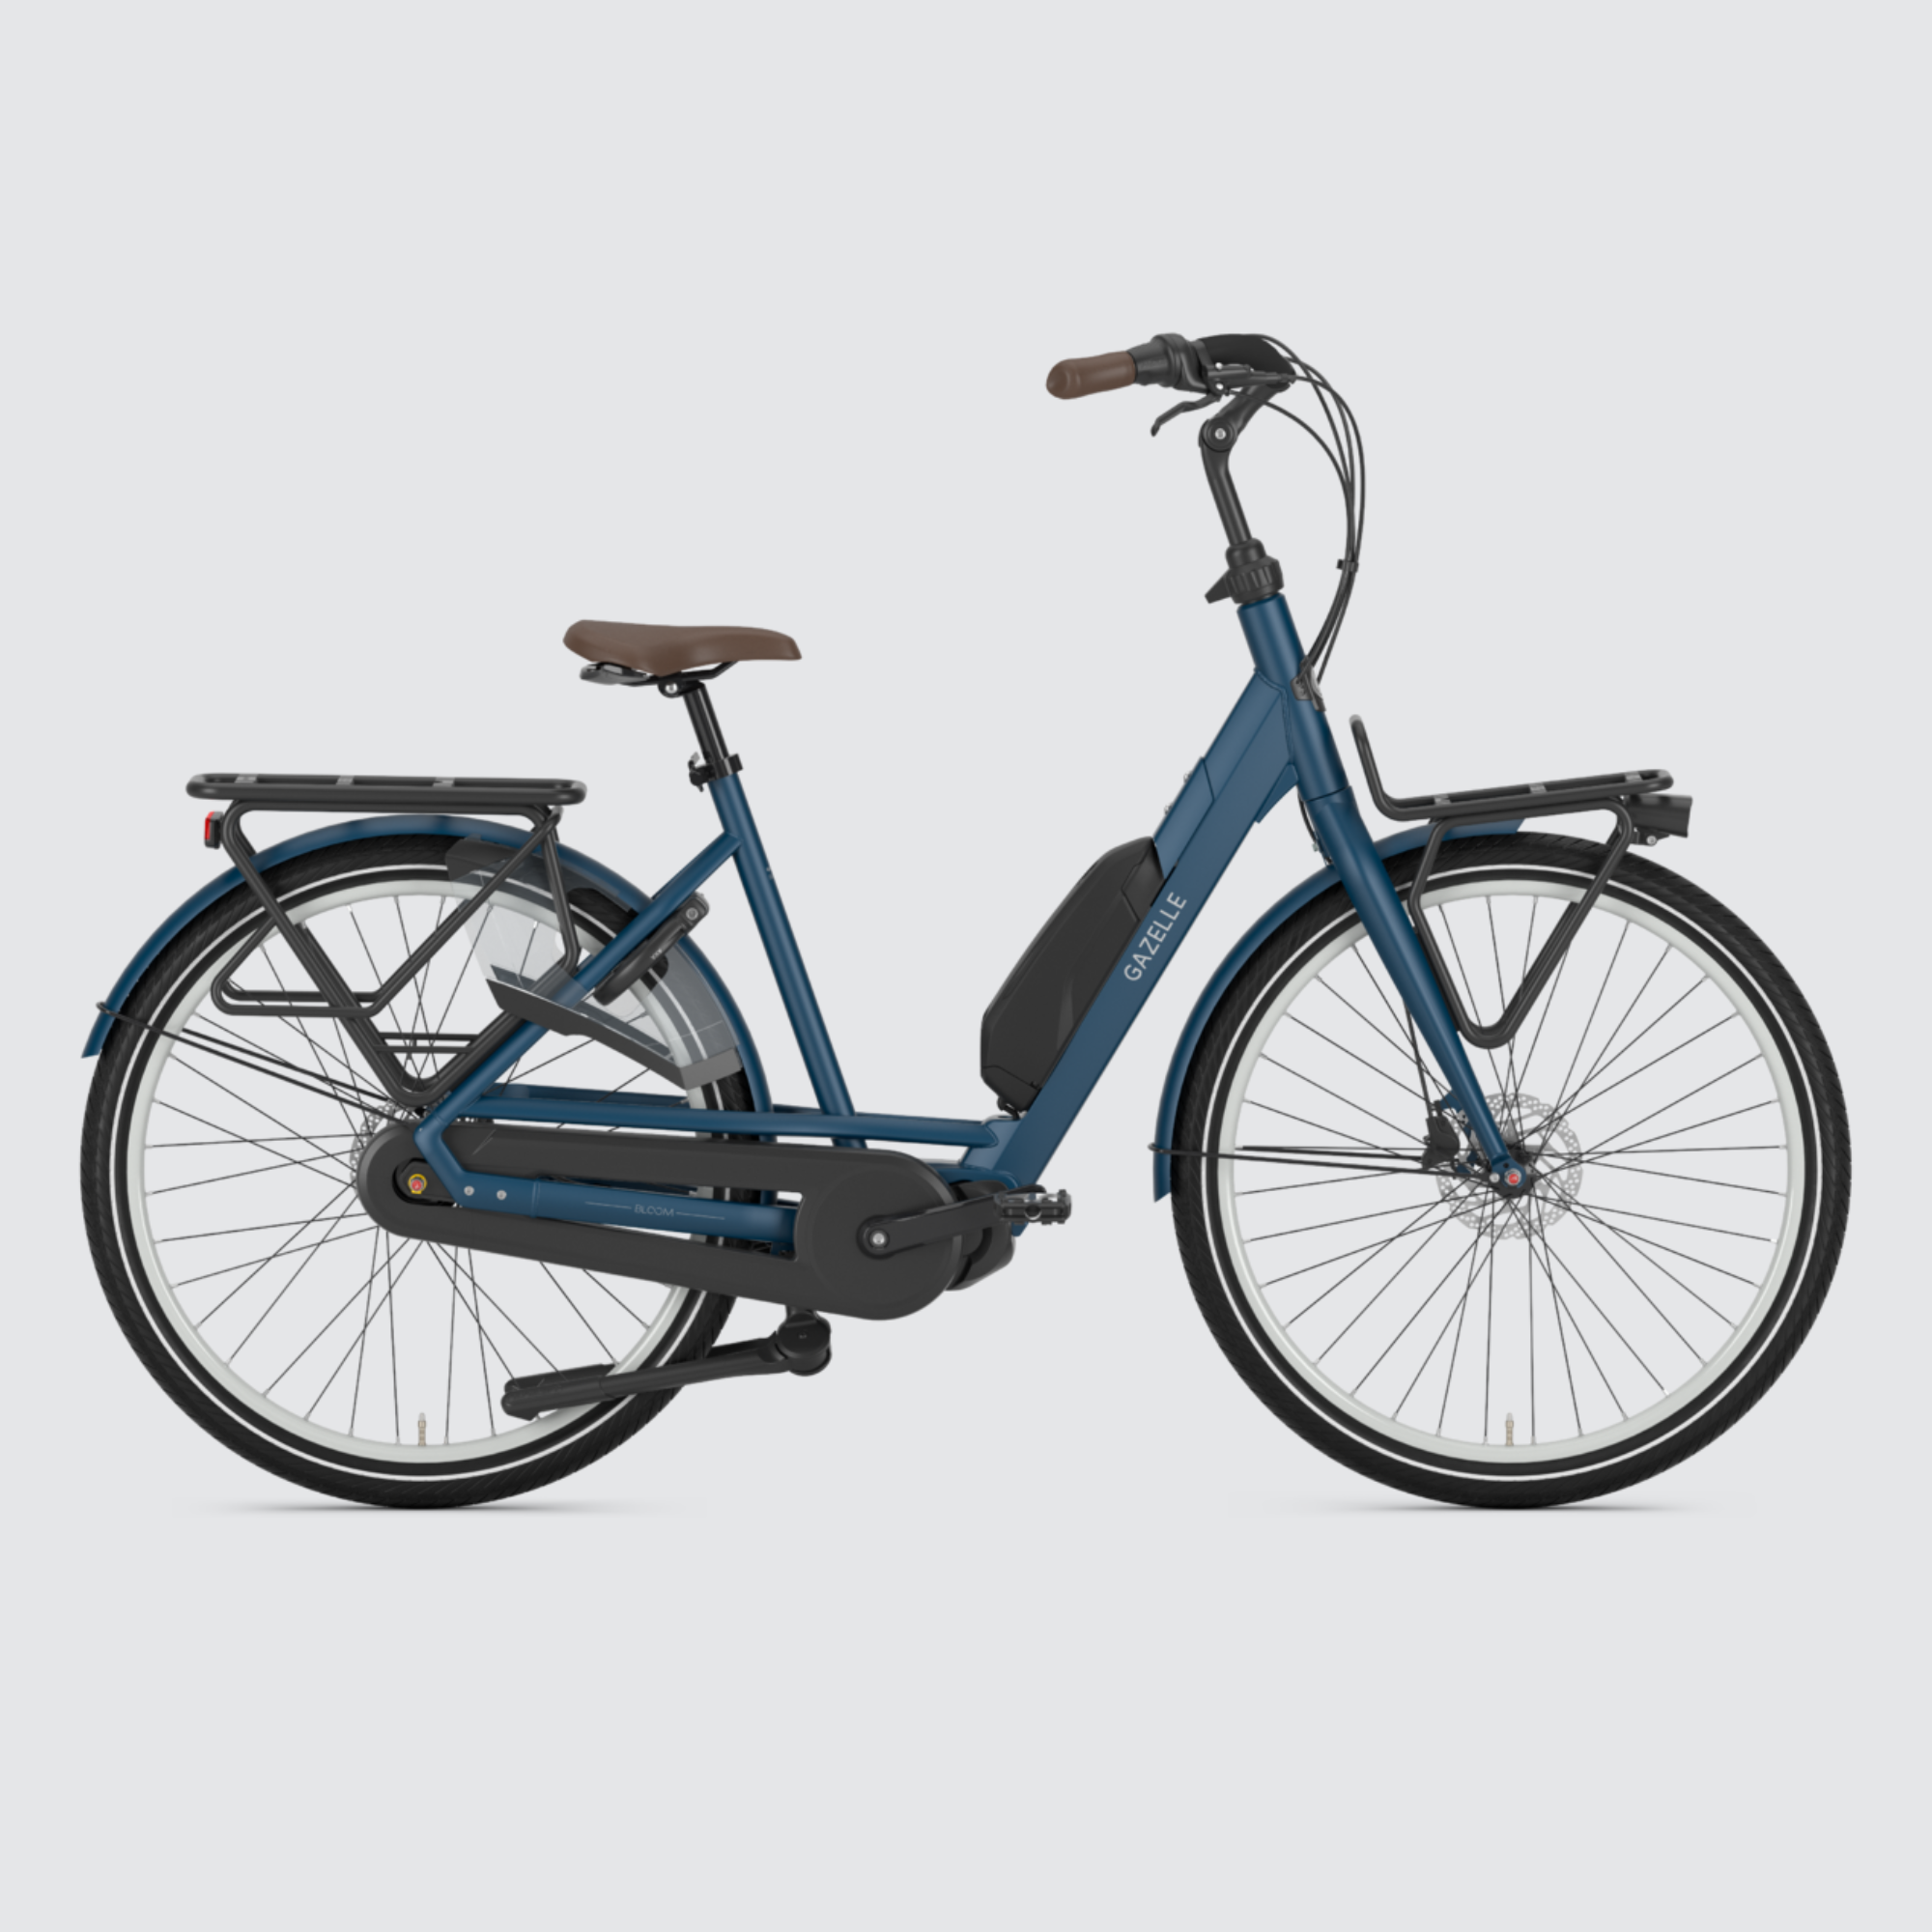 Effortless family cycling with the Gazelle Bloom C7 HMS – spacious design for comfort and safety. Shown in Mallard Blue colour.